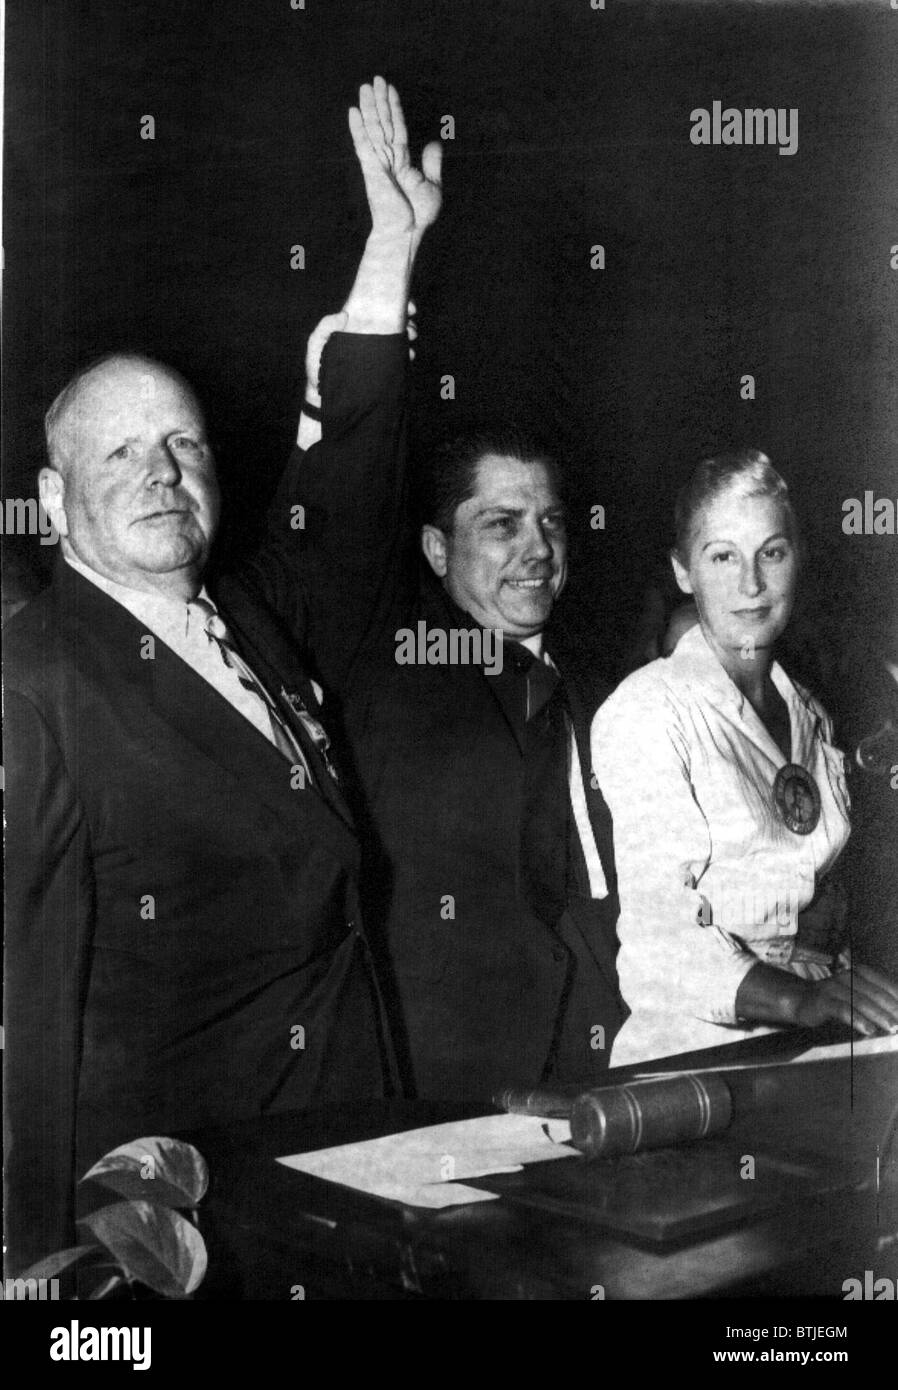 JAMES R. HOFFA-With his wife and Dave Beck after winning Teamsters Union election, Miami Beach, FL. 10/4/57 Stock Photo